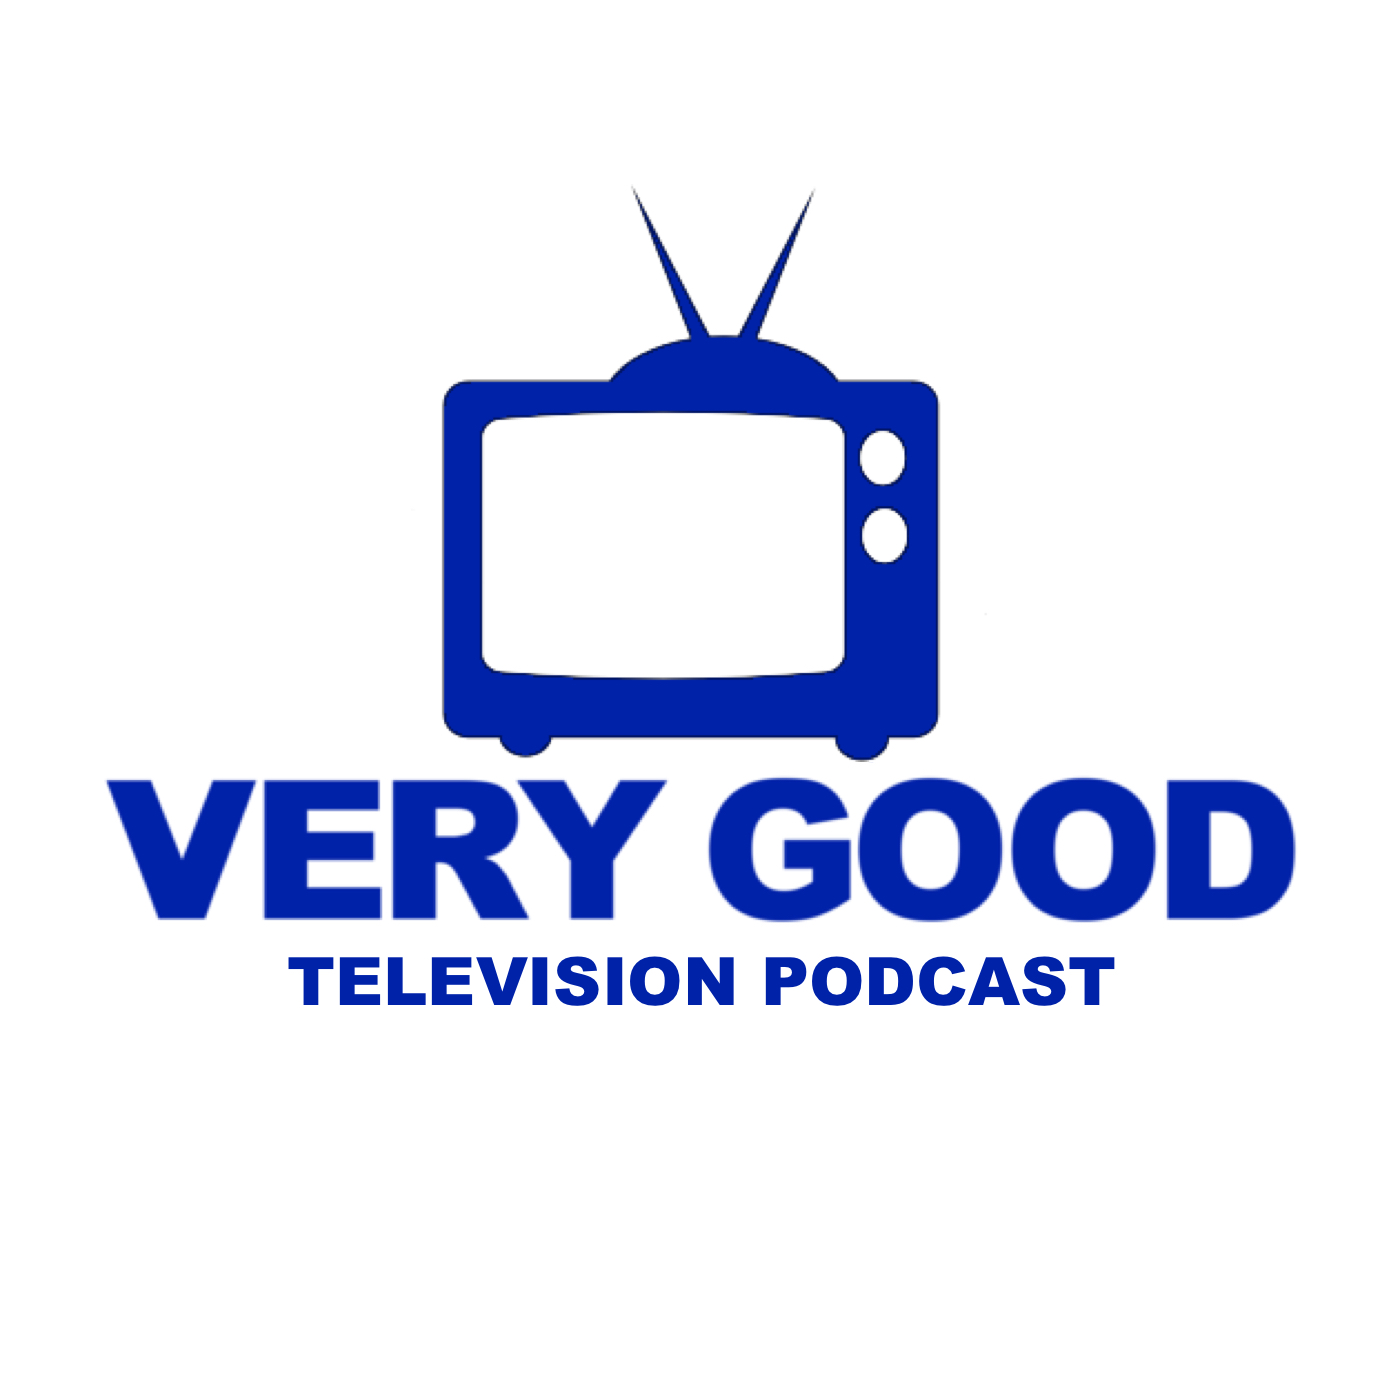 Indiewire\u0026#39;s Very Good TV Podcast | Listen via Stitcher for Podcasts